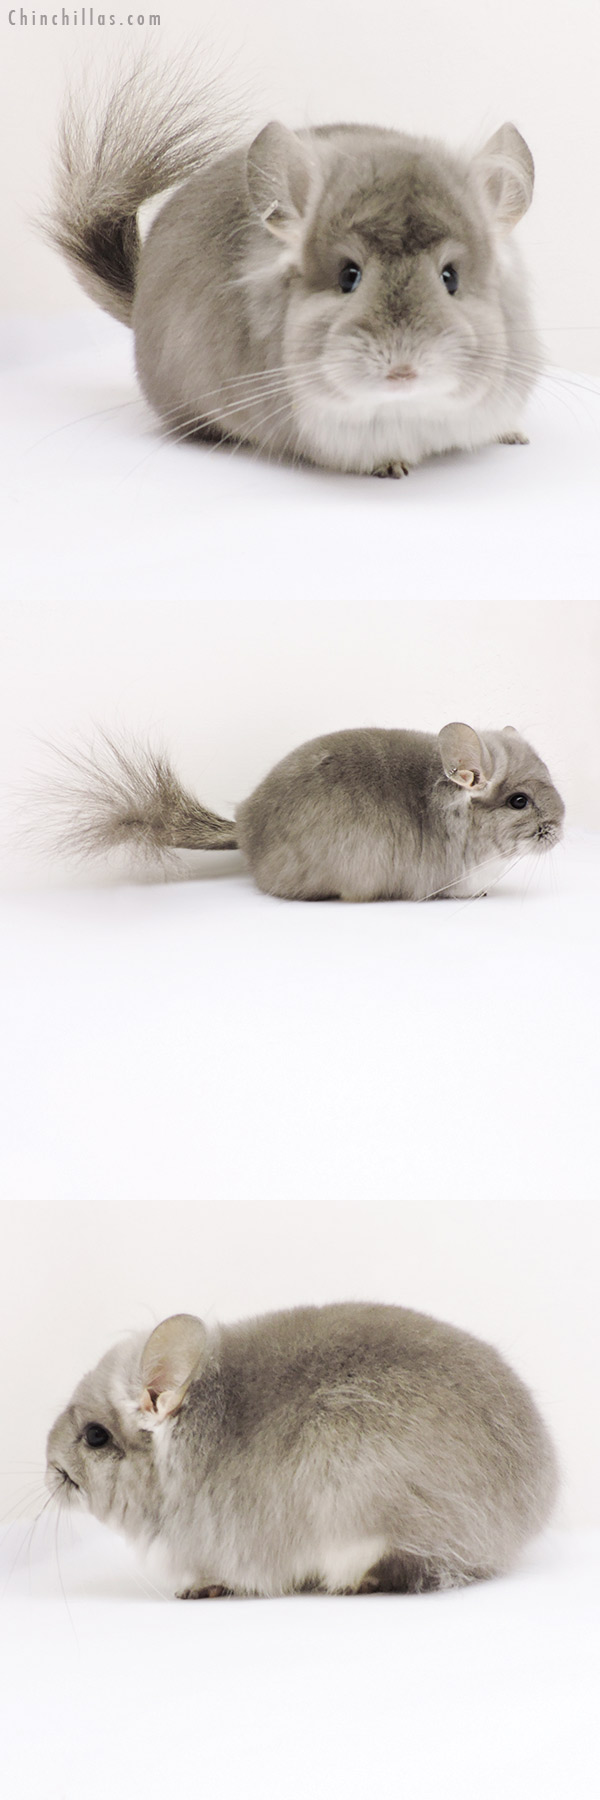 Chinchilla or related item offered for sale or export on Chinchillas.com - 19271 Violet  Royal Persian Angora Female Chinchilla